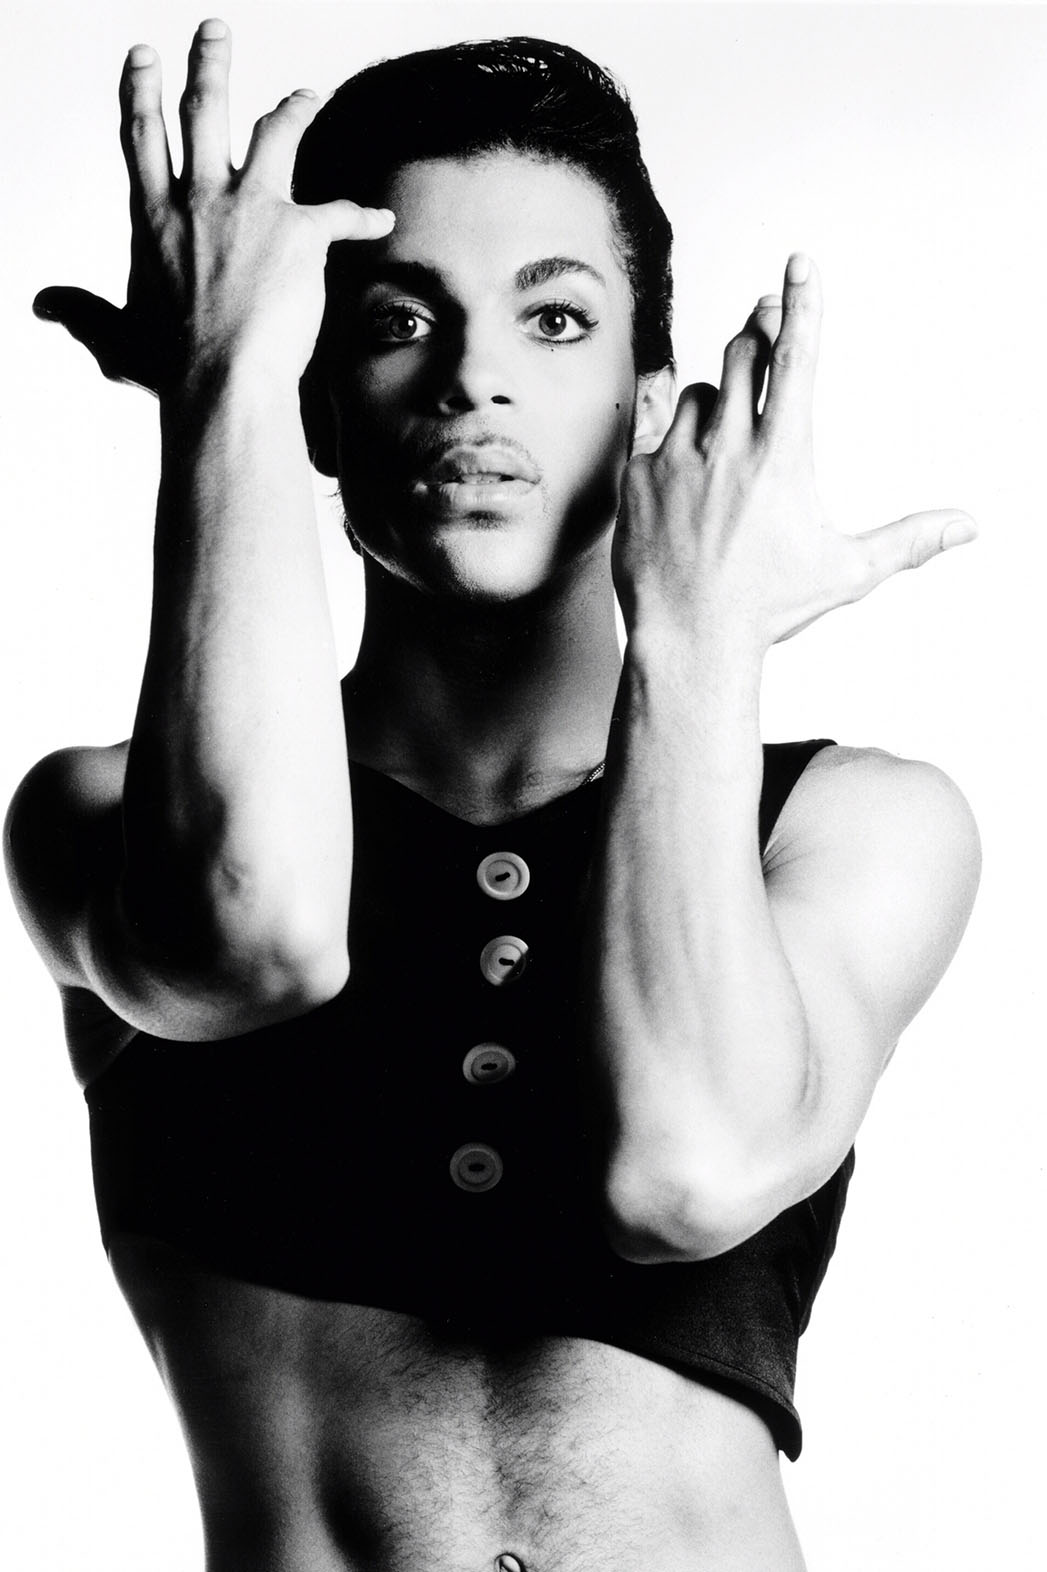 Happy birthday to true royalty...the iconic Prince (R.I.P) 